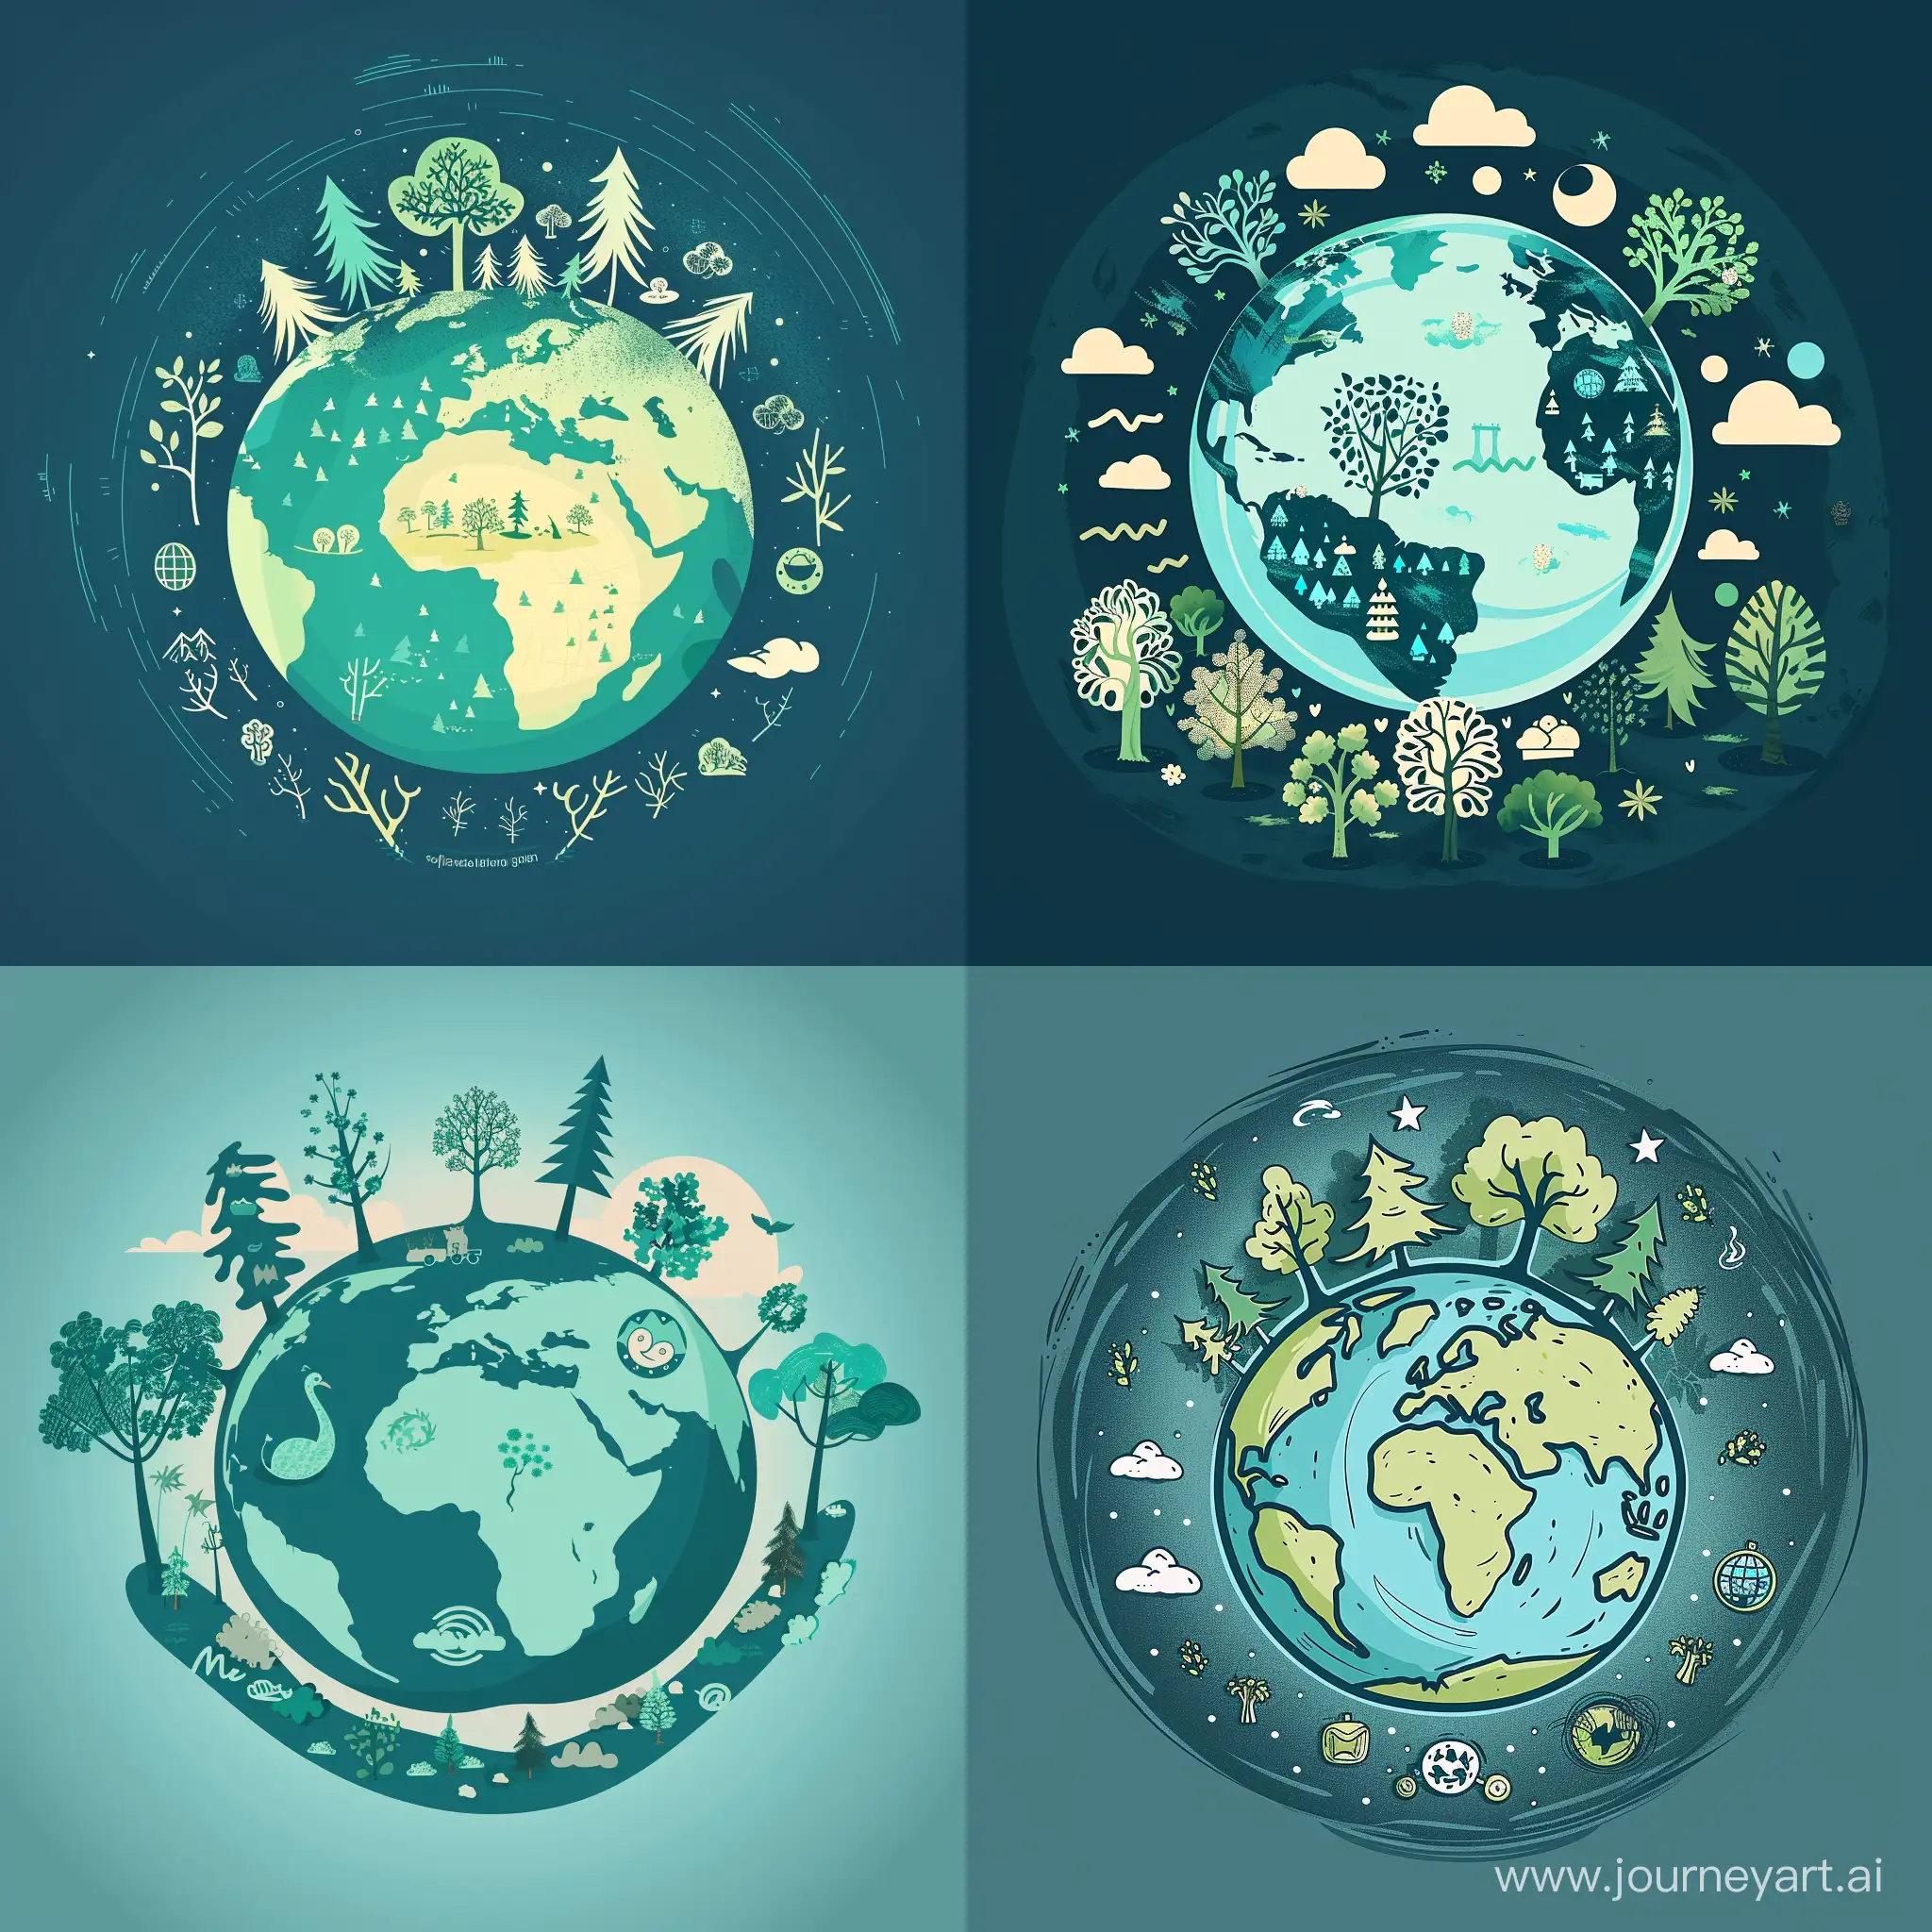 the earth with trees and environmental icons, in the style of light teal and dark sky-blue, cute cartoonish designs